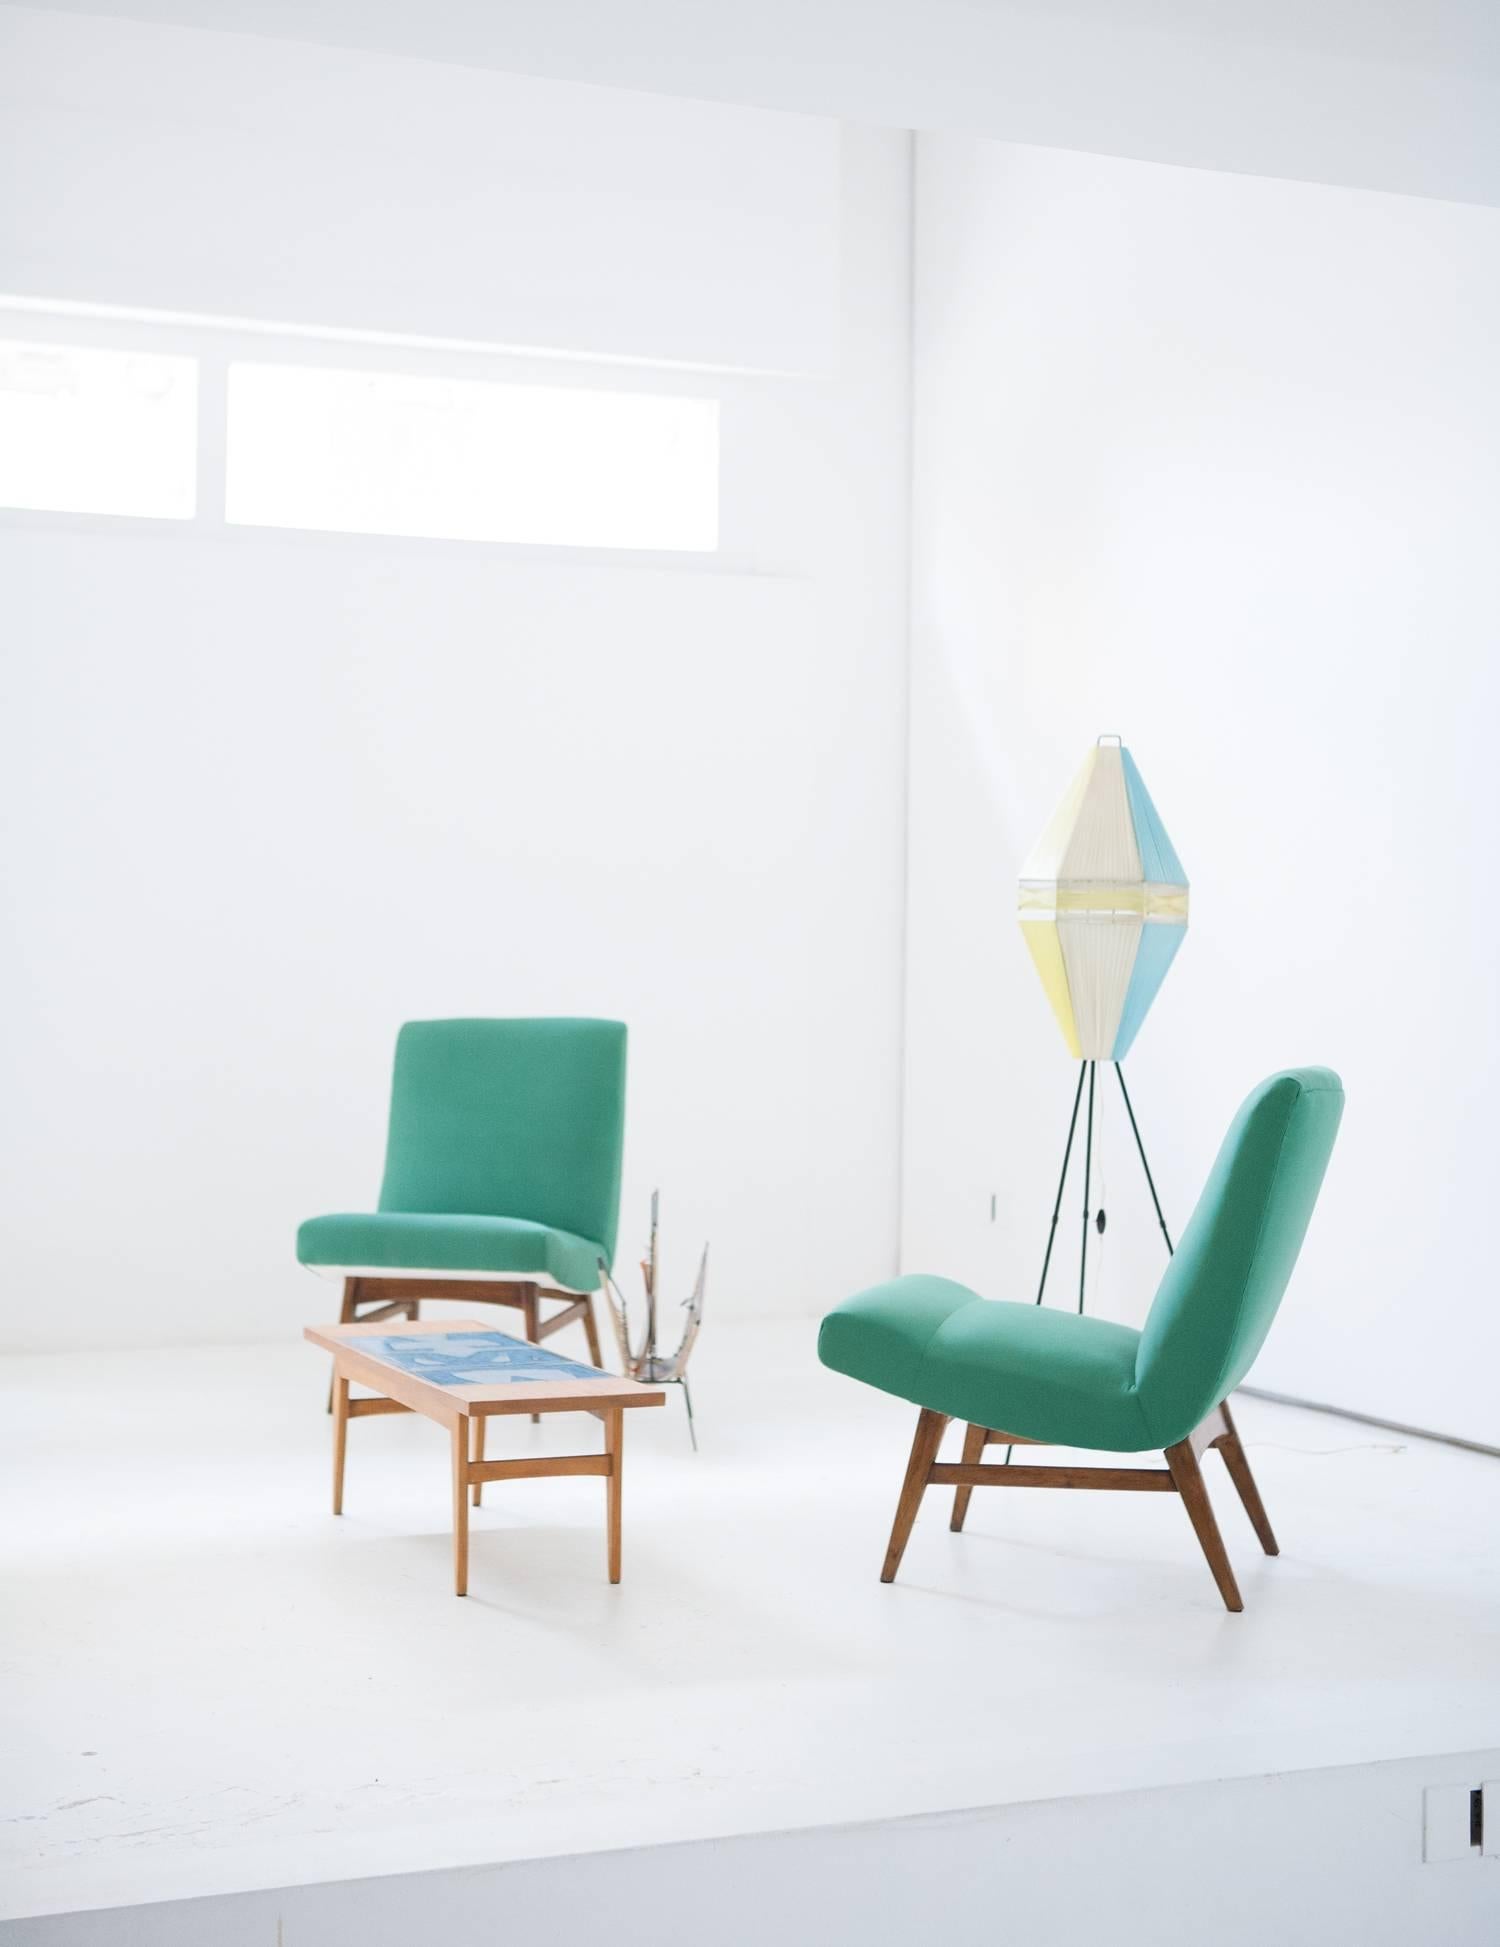 A pair of modern easy chairs, designed and produced in Denmark in the Mid-Century. New gree upholstery.